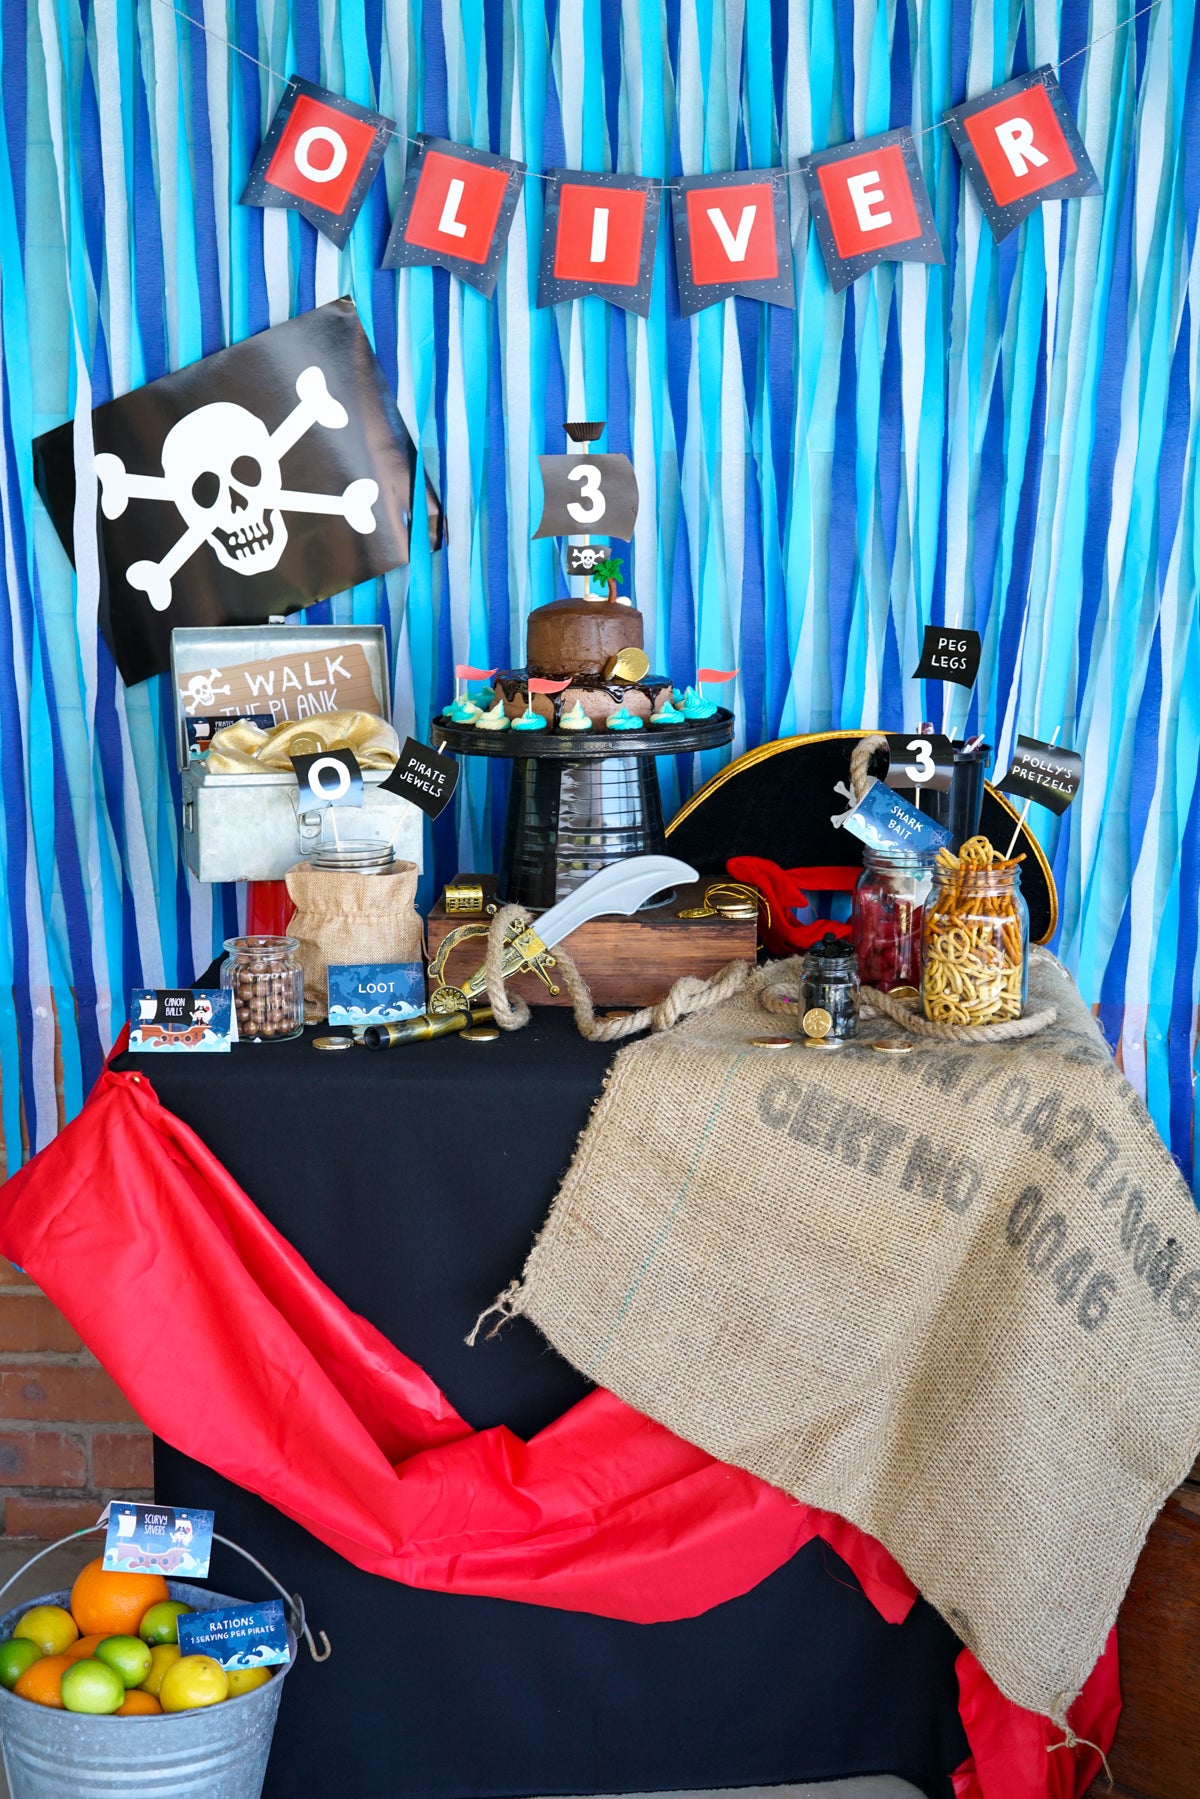 Pirate party table set up